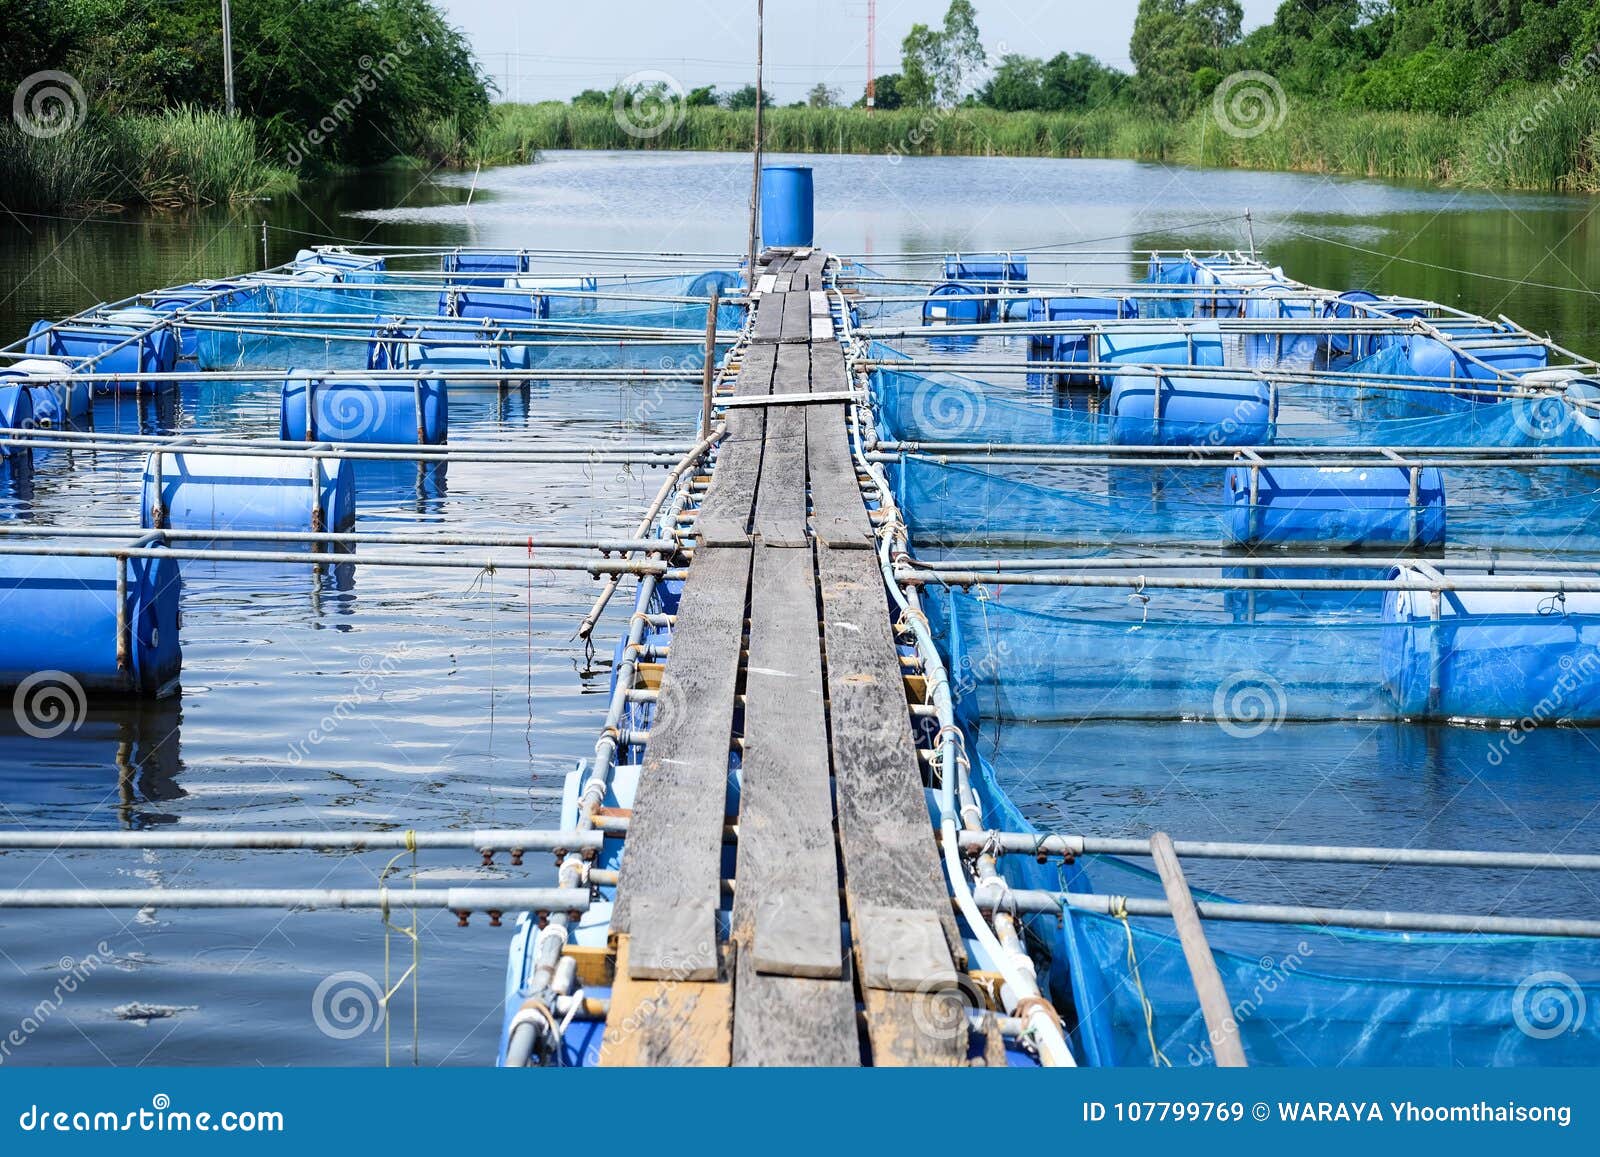 Cages for Fish Farm, Aquaculture in Thailand Stock Image - Image